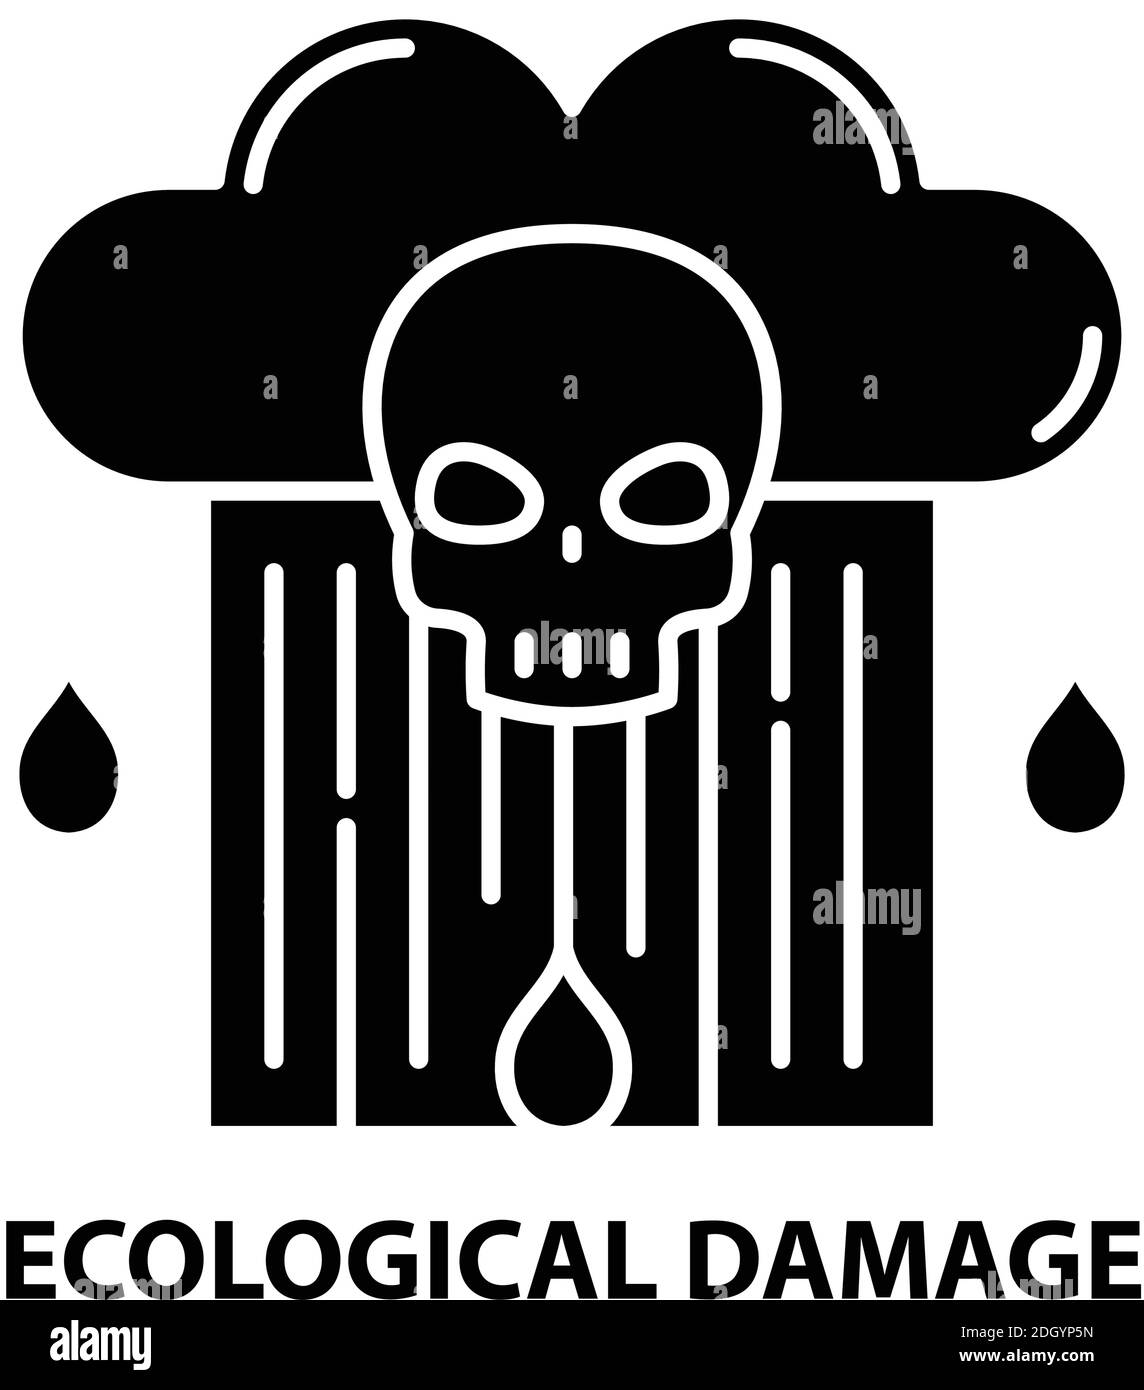 ecological damage icon, black vector sign with editable strokes, concept illustration Stock Vector